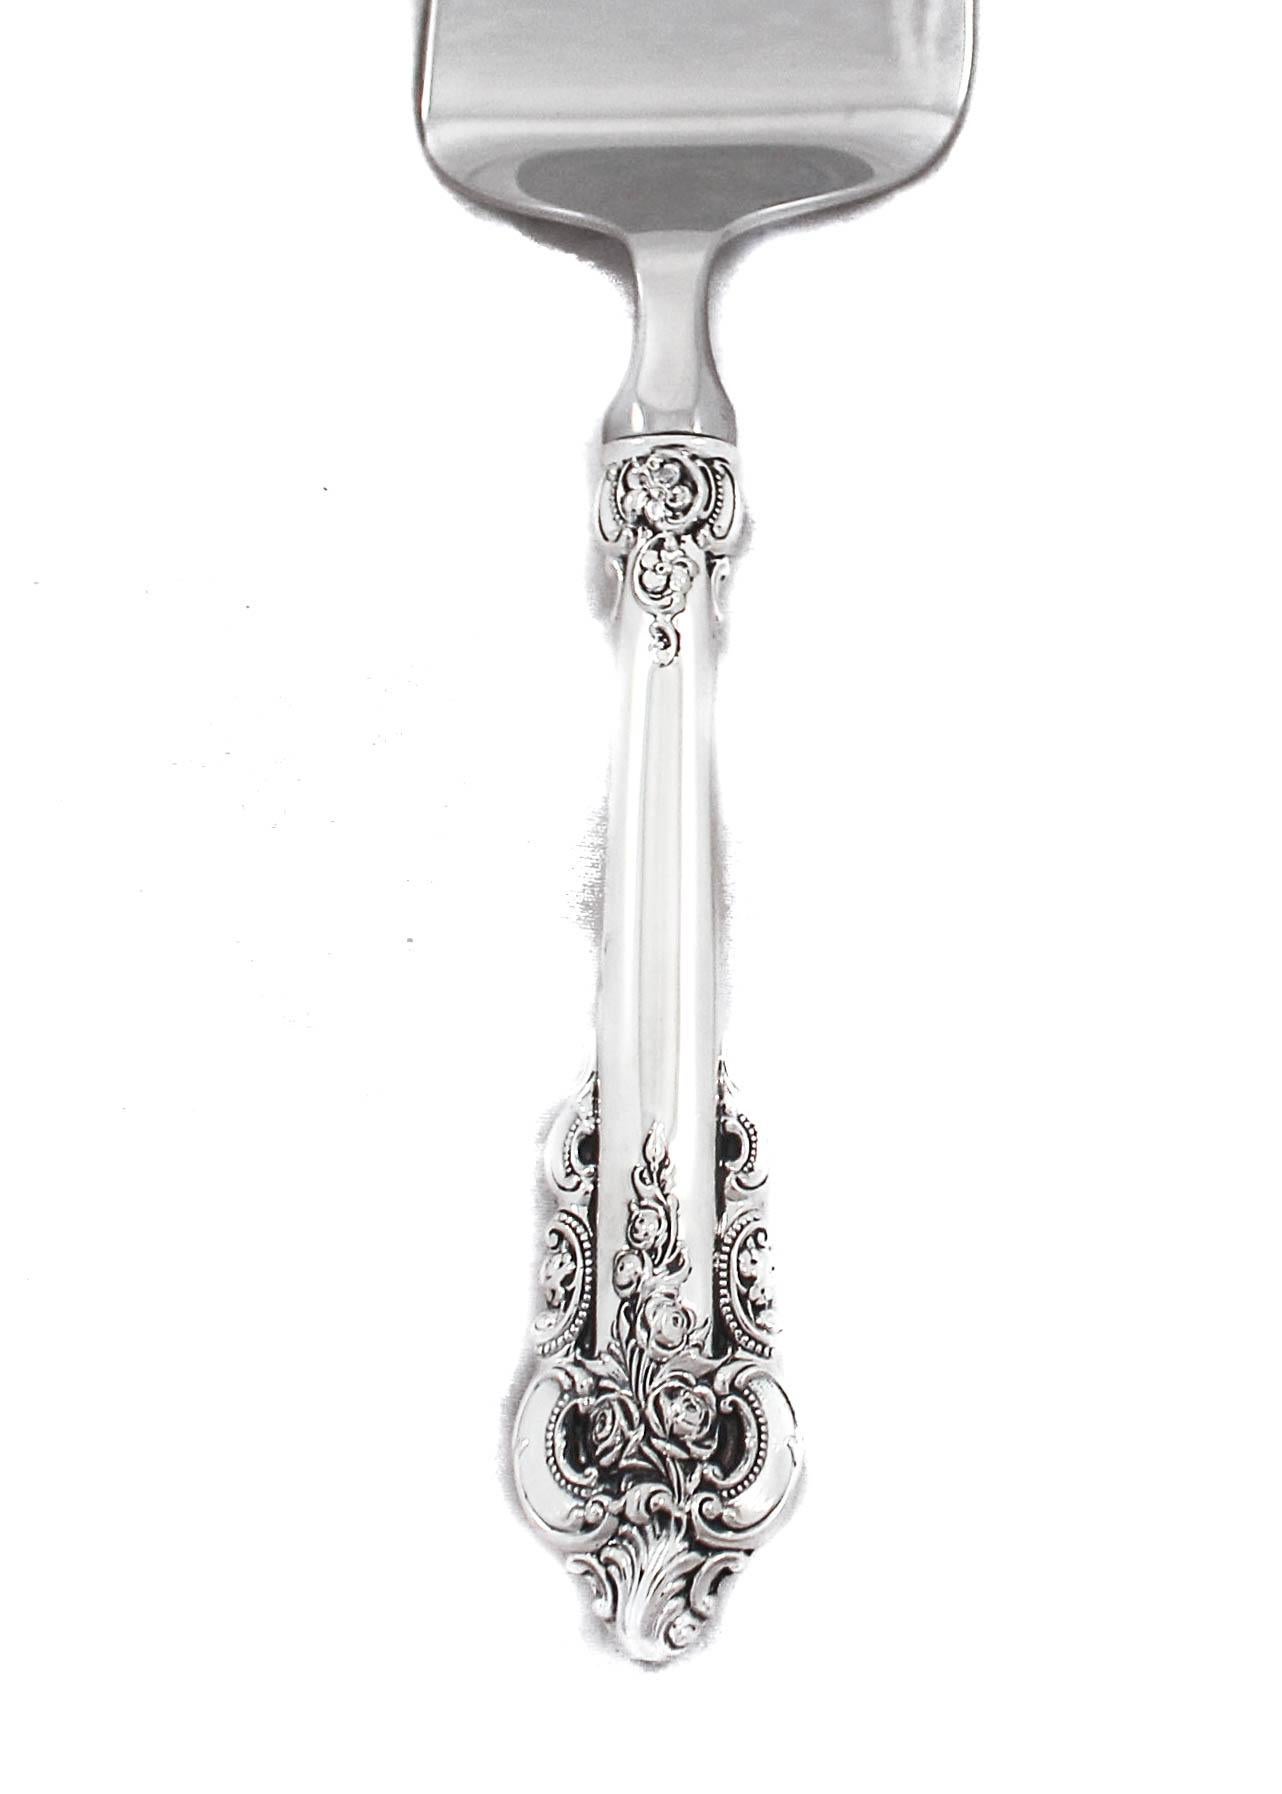 Being offered is a sterling silver server in the Grande Baroque pattern. Perfect for pies, cakes, quiche or even fish. The handle has a rich, ornate design. Makes a lovely holiday, housewarming or hostess gift.